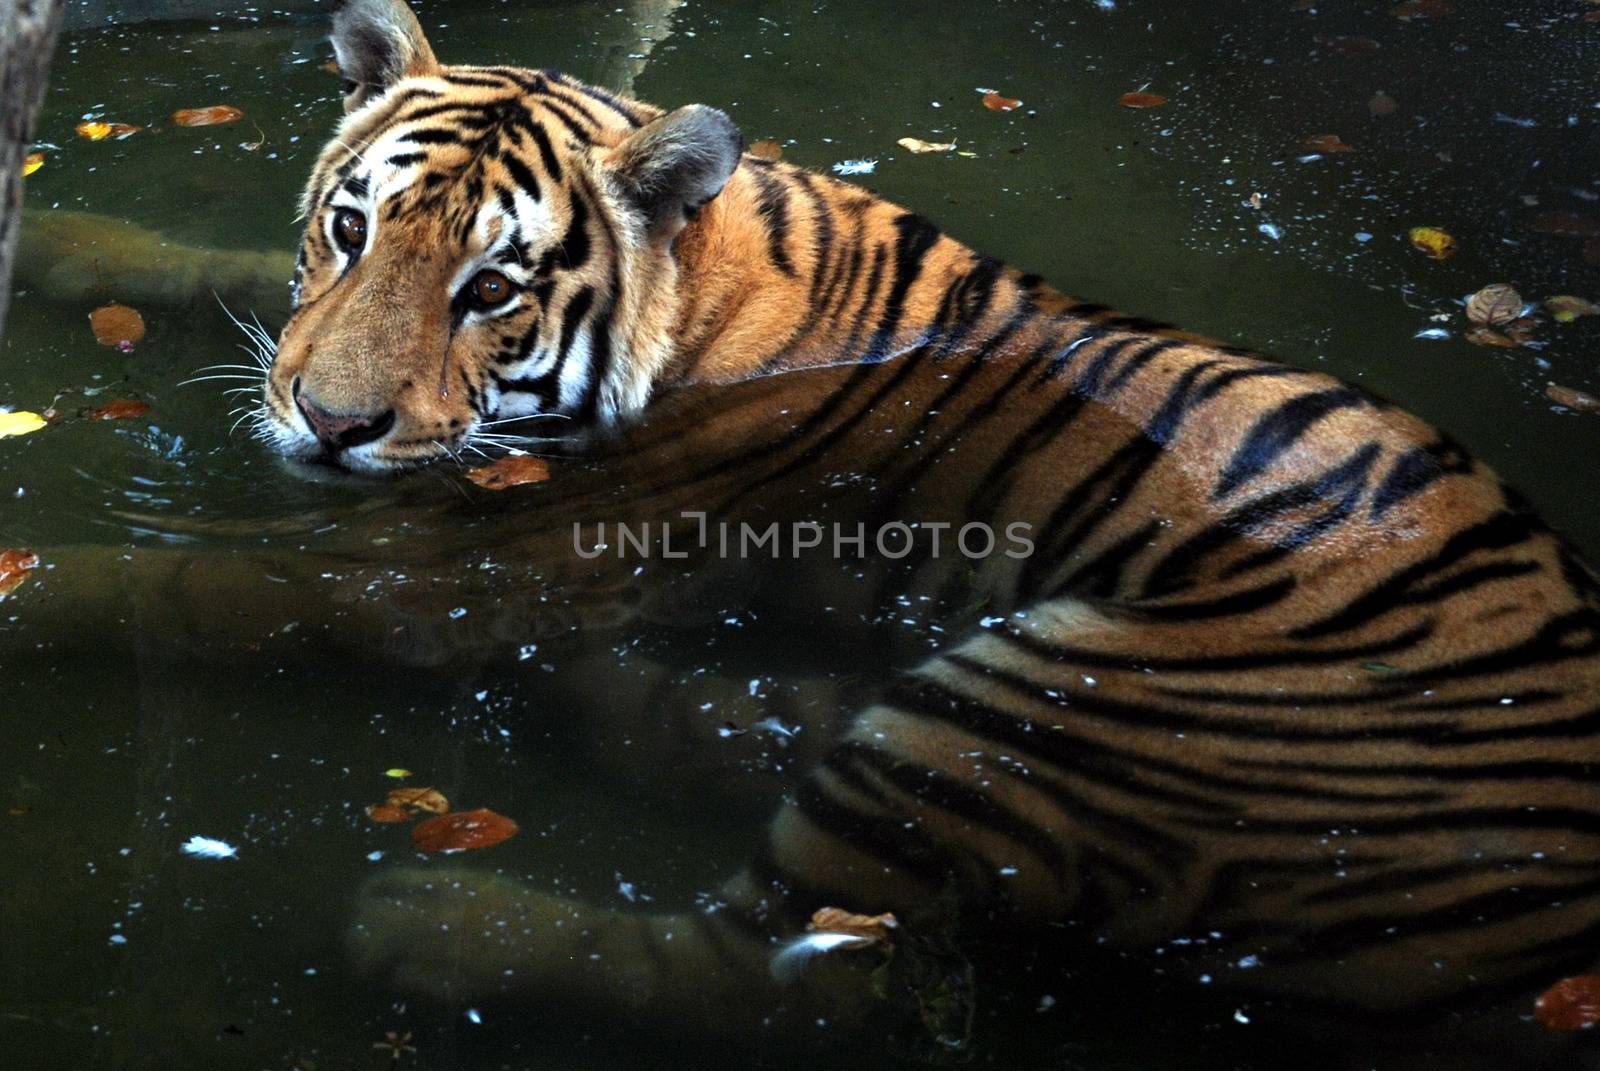 PAKISTAN, Karachi: A tiger braves the scorching heat wave on September 20, 2015 by taking a dip at the Zoological Garden in Karachi, Pakistan.